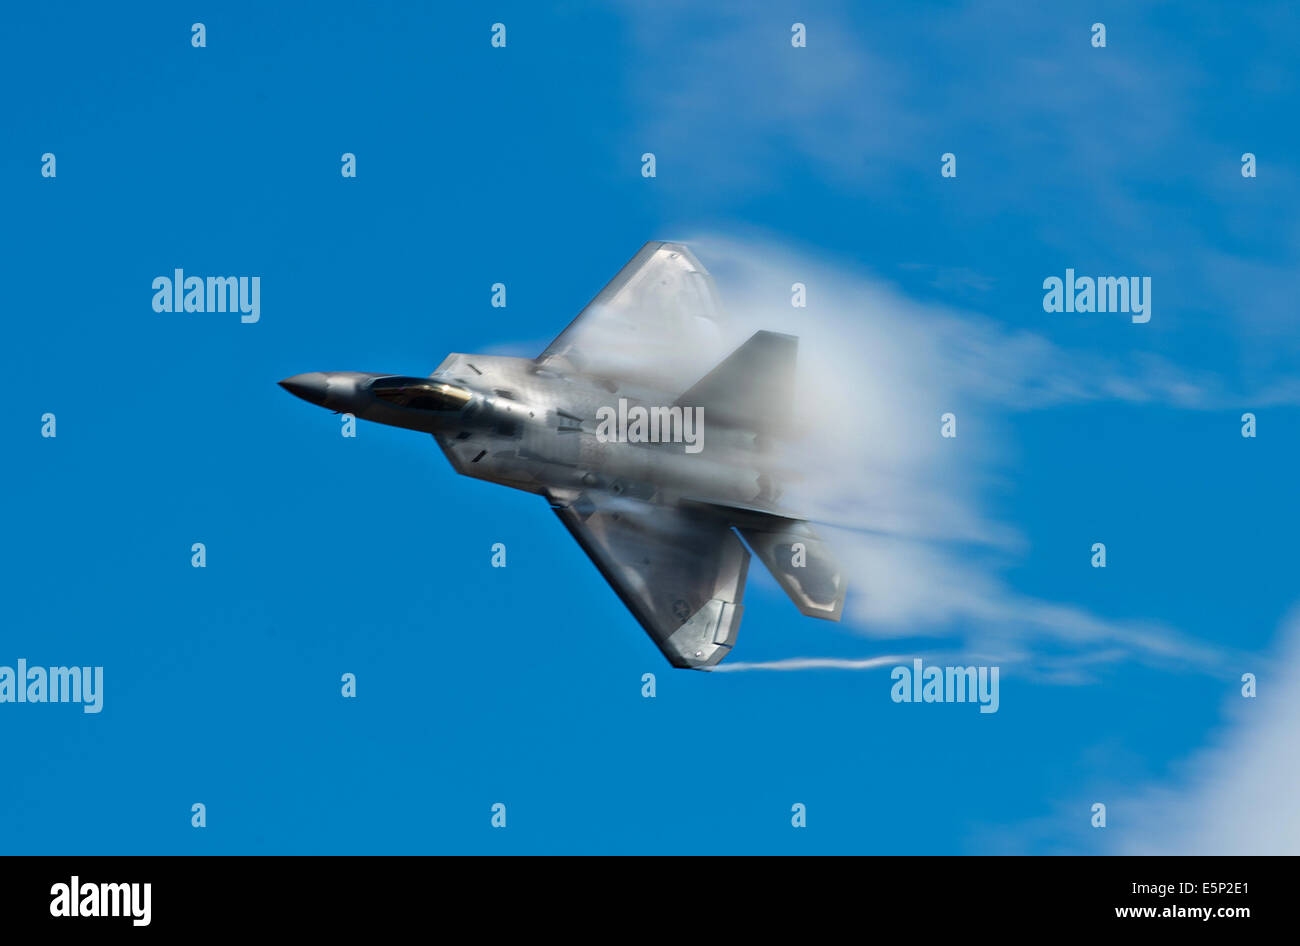 A US Air Force F-22 Raptor stealth fighter aircraft performs aerial maneuvers over Joint Base Elmendorf-Richardson during the Arctic Thunder Open House July 26, 2014 in Anchorage, Alaska. Stock Photo